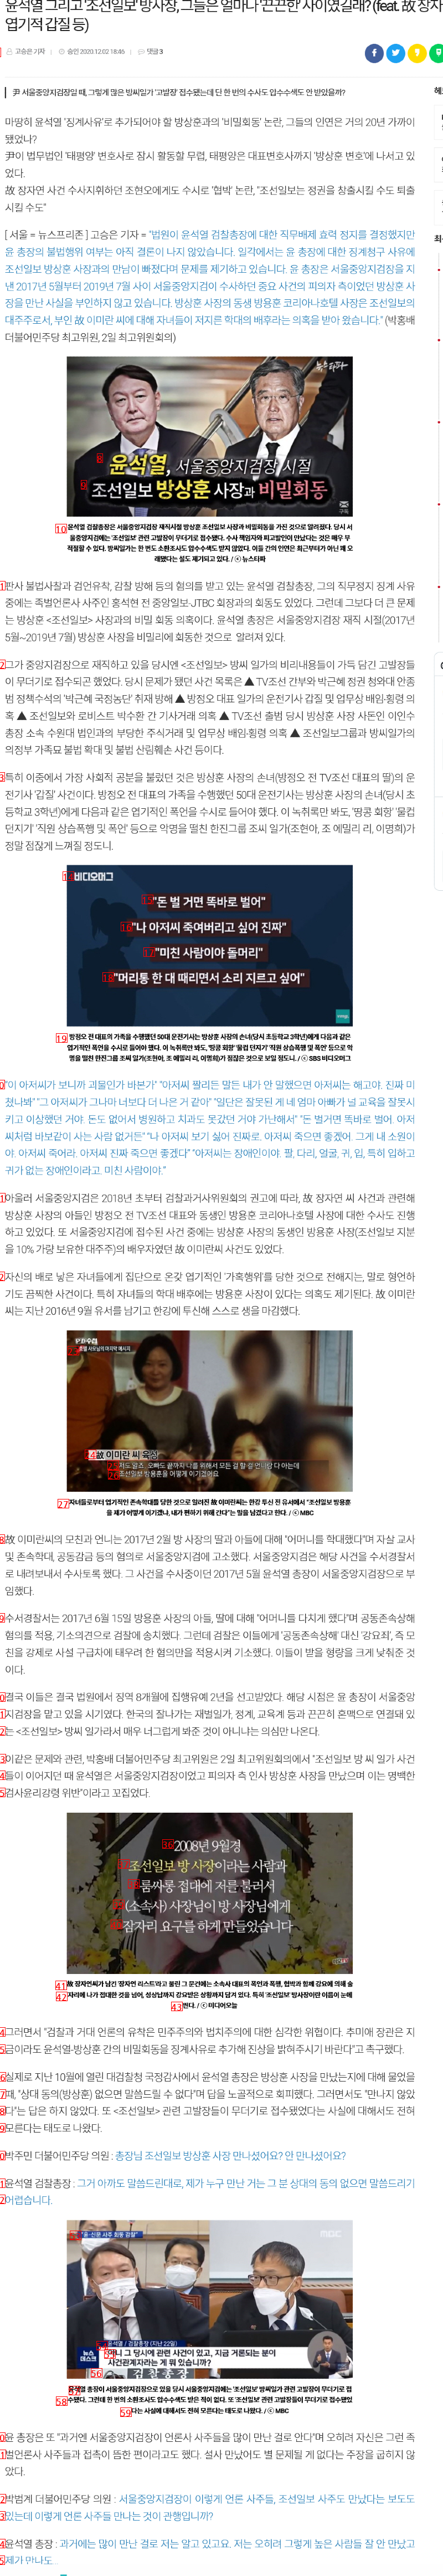 There's a reason why the Chosun Ilbo was sucking up the Yoon Suk Yeol